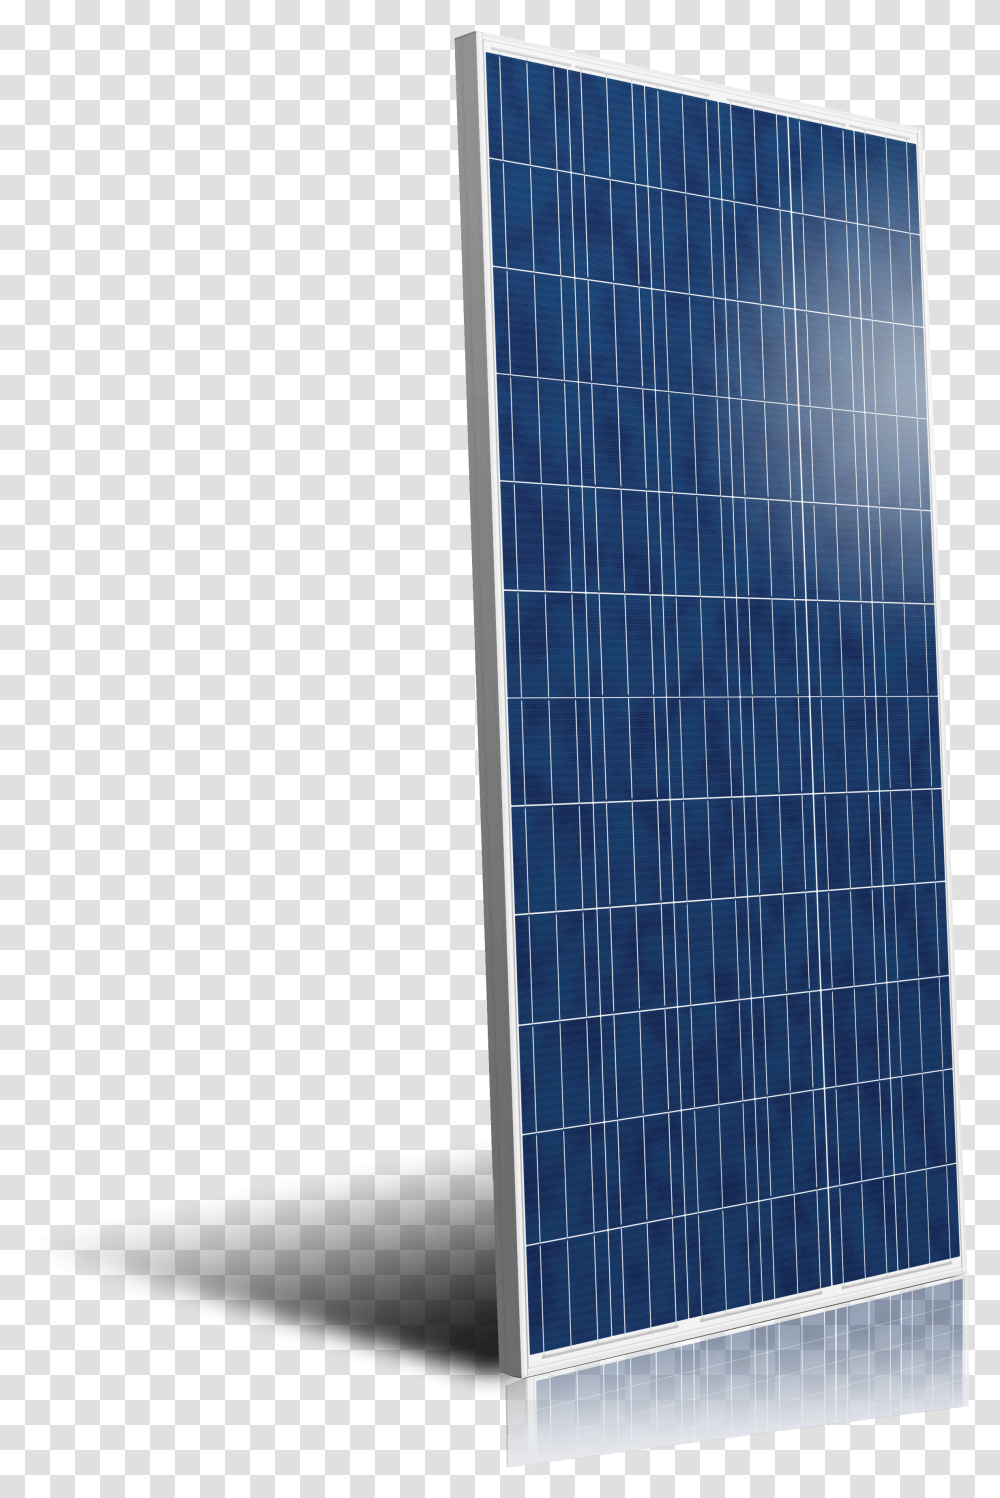 Images Pngs Solar Solar Panel Solar Panels, Electrical Device Transparent Png